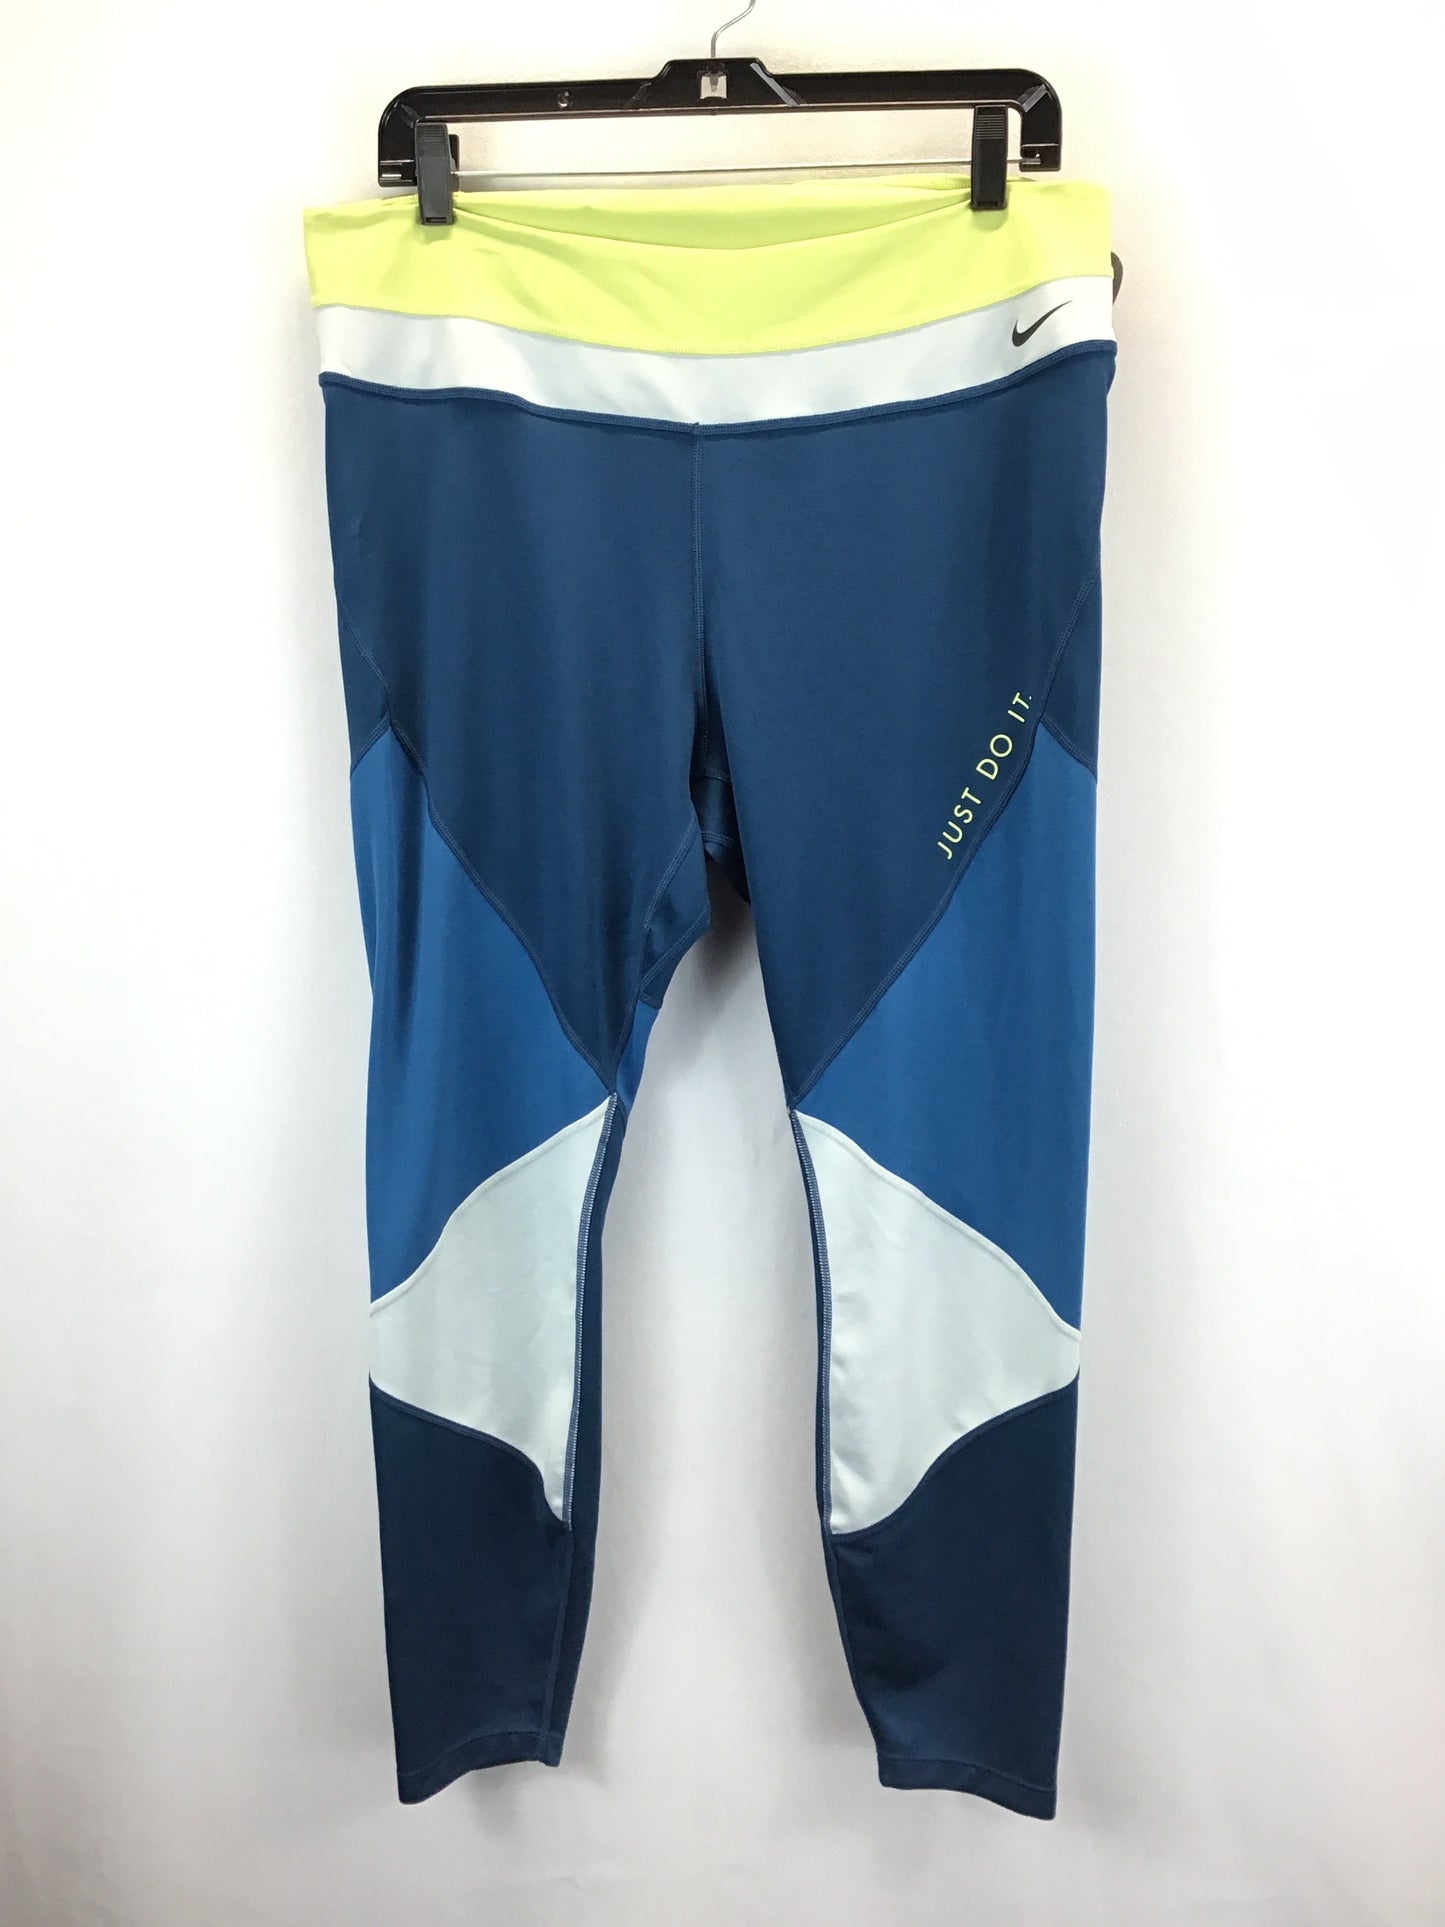 Blue & Yellow Athletic Pants Nike Apparel, Size 1x